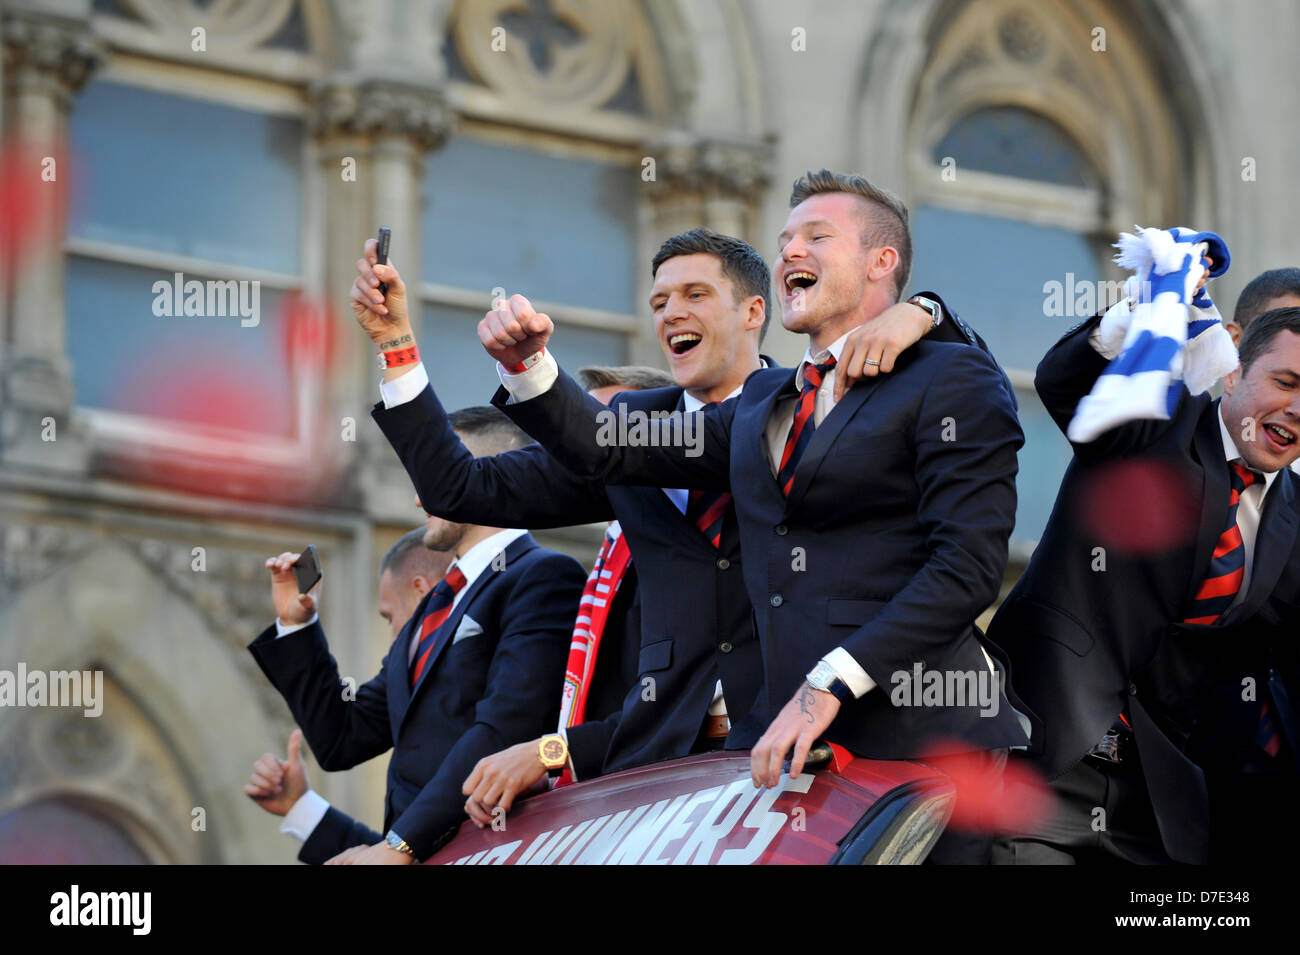 Cardiff, UK. 5th May 2013. Cardiff City FC players show off their Championship trophy to thousands of fans gathered to show their support. The team were paraded through the city in an open top bus after winning the Championship and being promoted to the Premier League. Credit: Polly Thomas/Alamy Live News Stock Photo